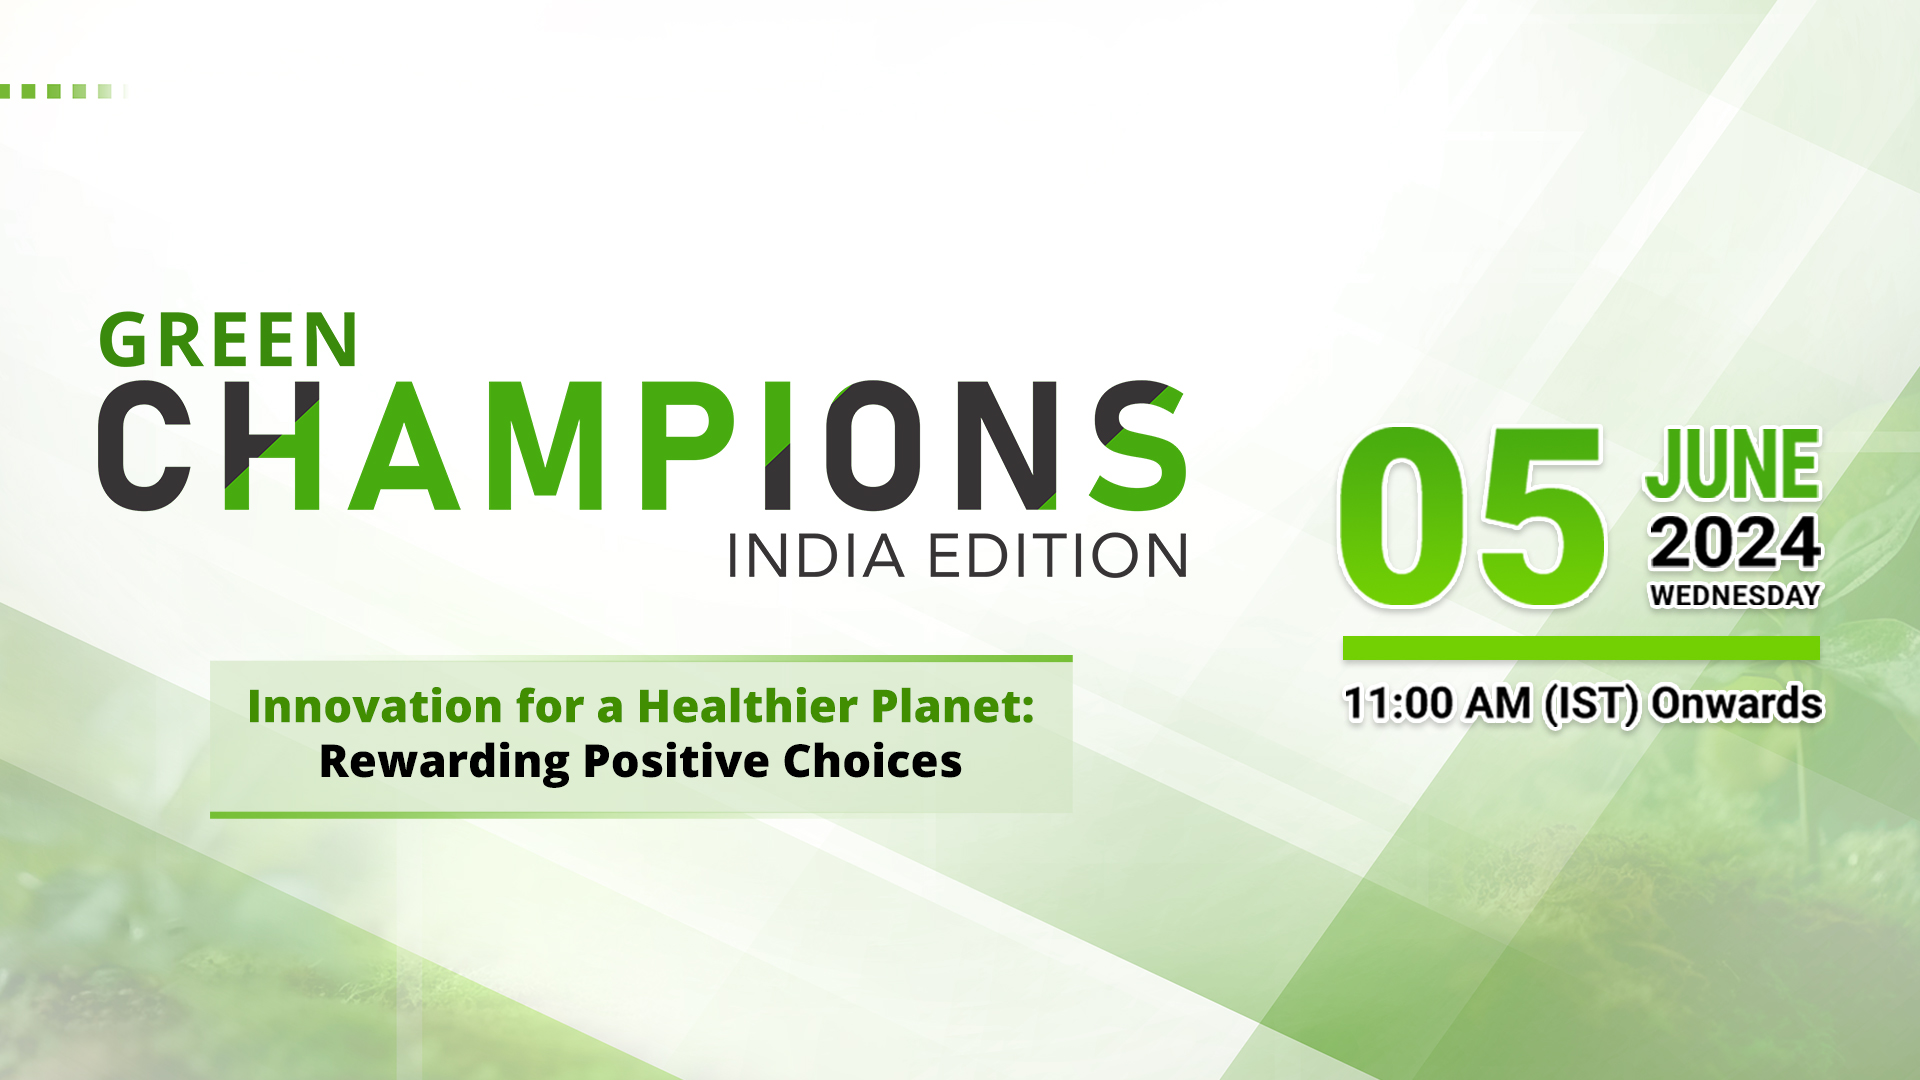 GECI Events announces the India edition of Green Champions